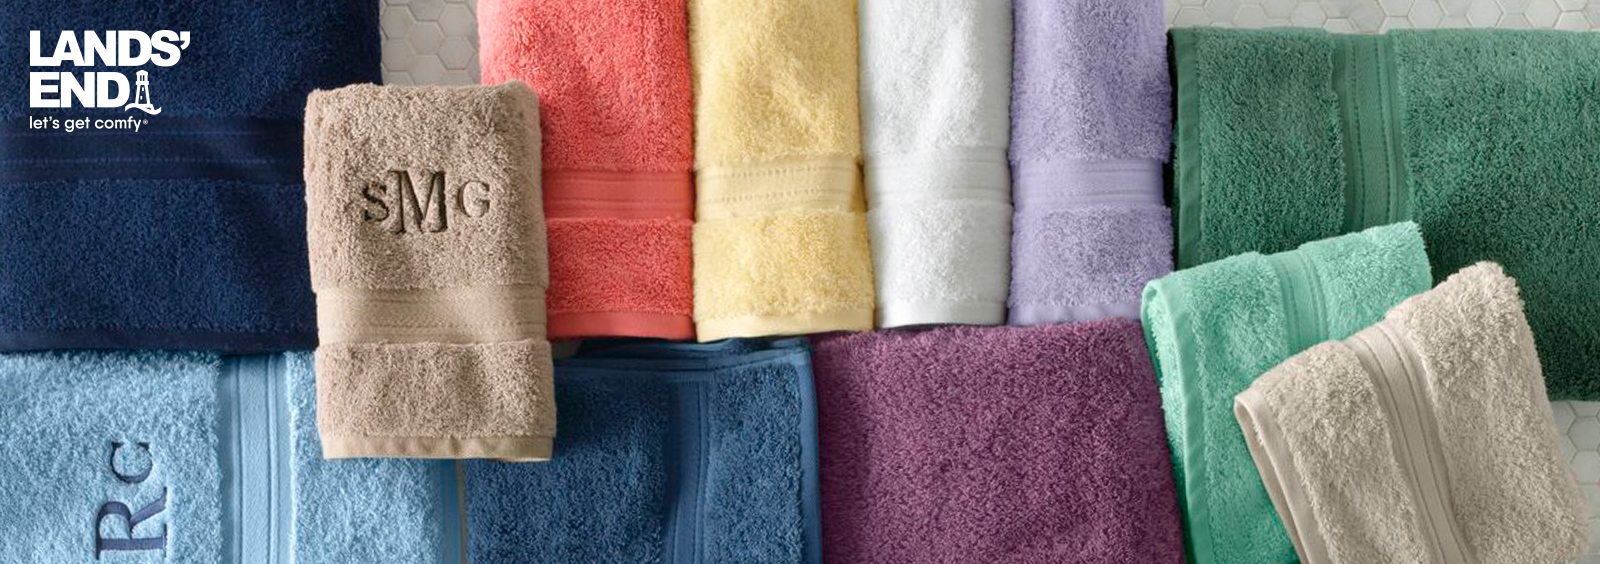 Keep it Colorful: How to Bring Color into Your Home